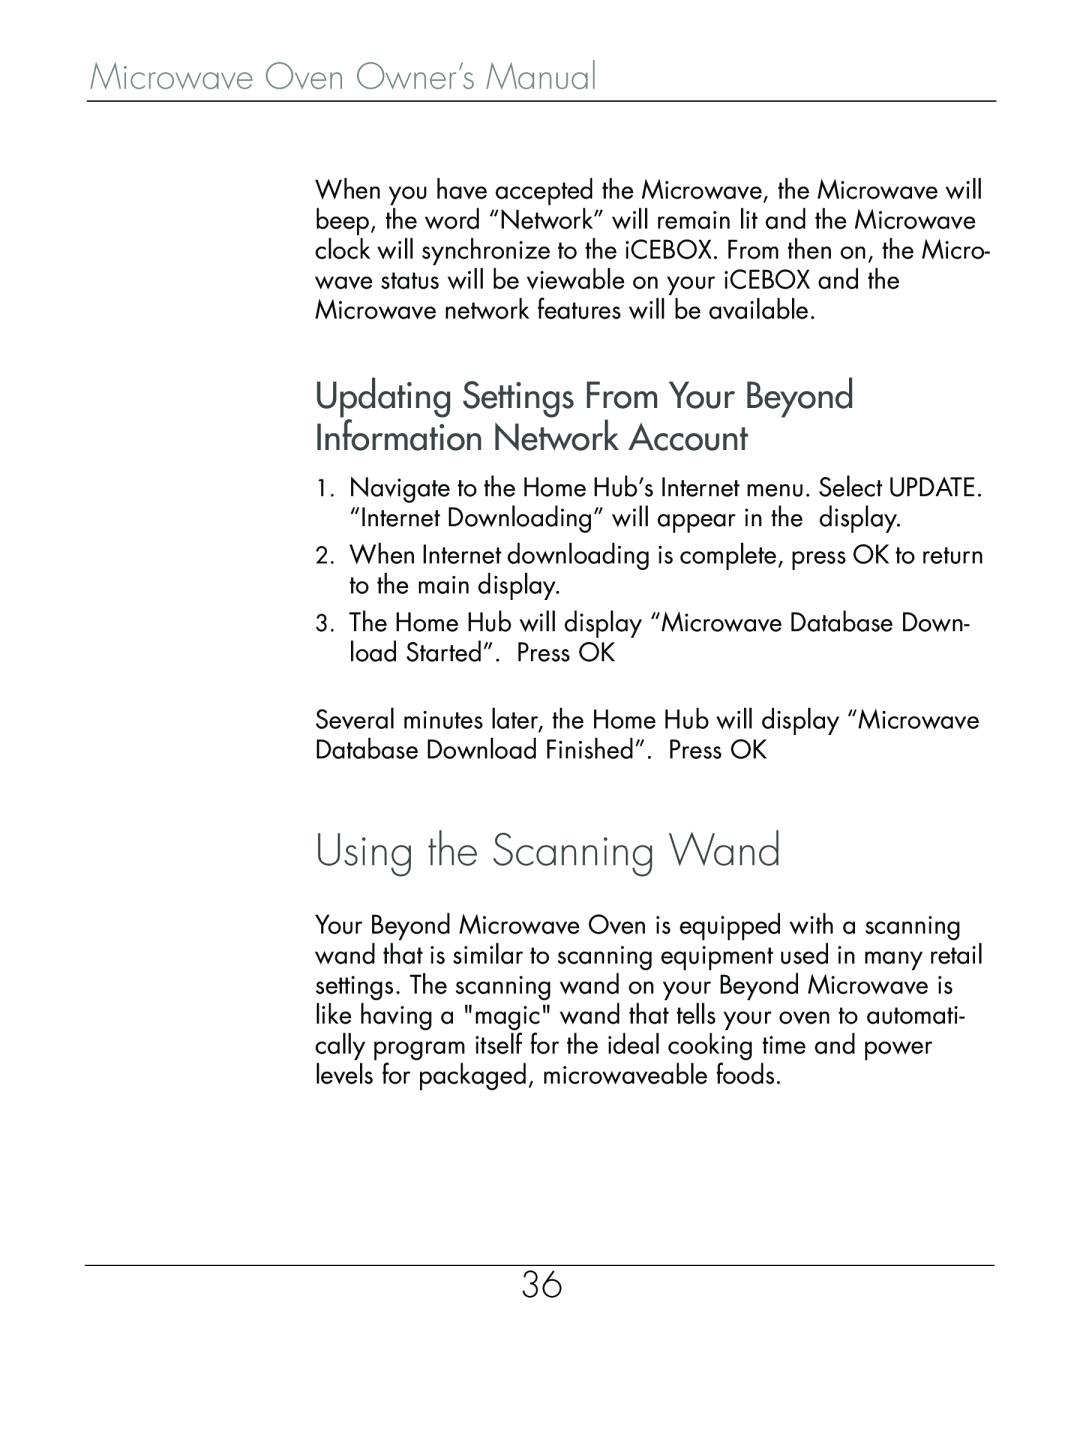 Beyond Microwace Oven manual Using the Scanning Wand, Microwave Oven Owner’s Manual 